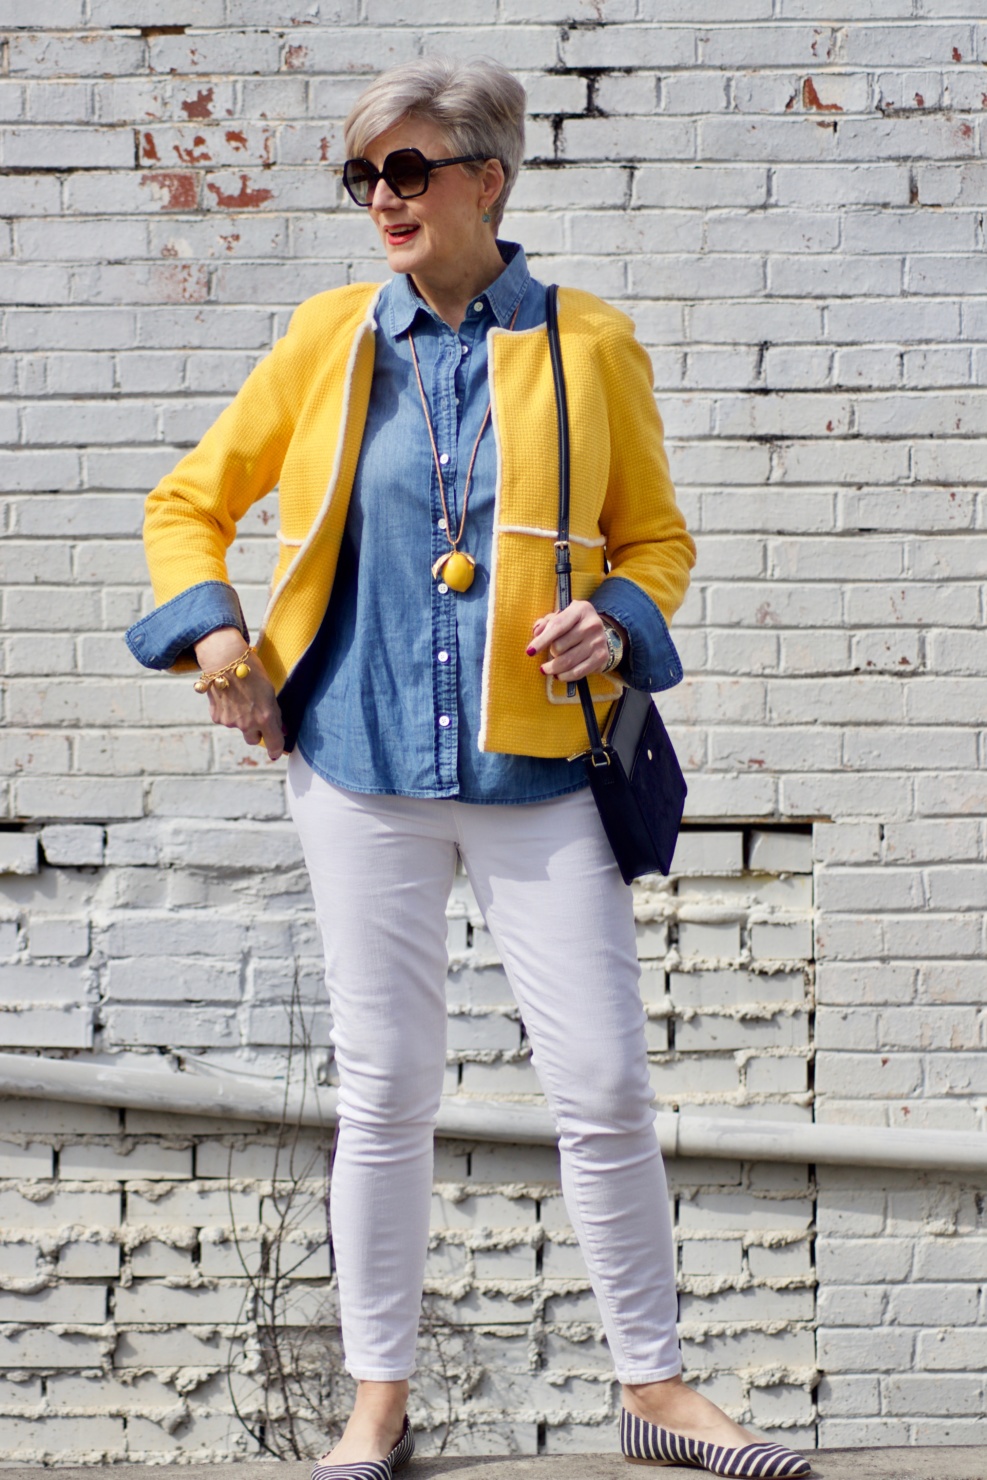 beth from Style at a Certain Age wears a Boden yellow blazer, chambray shirt, white denim and striped shoes